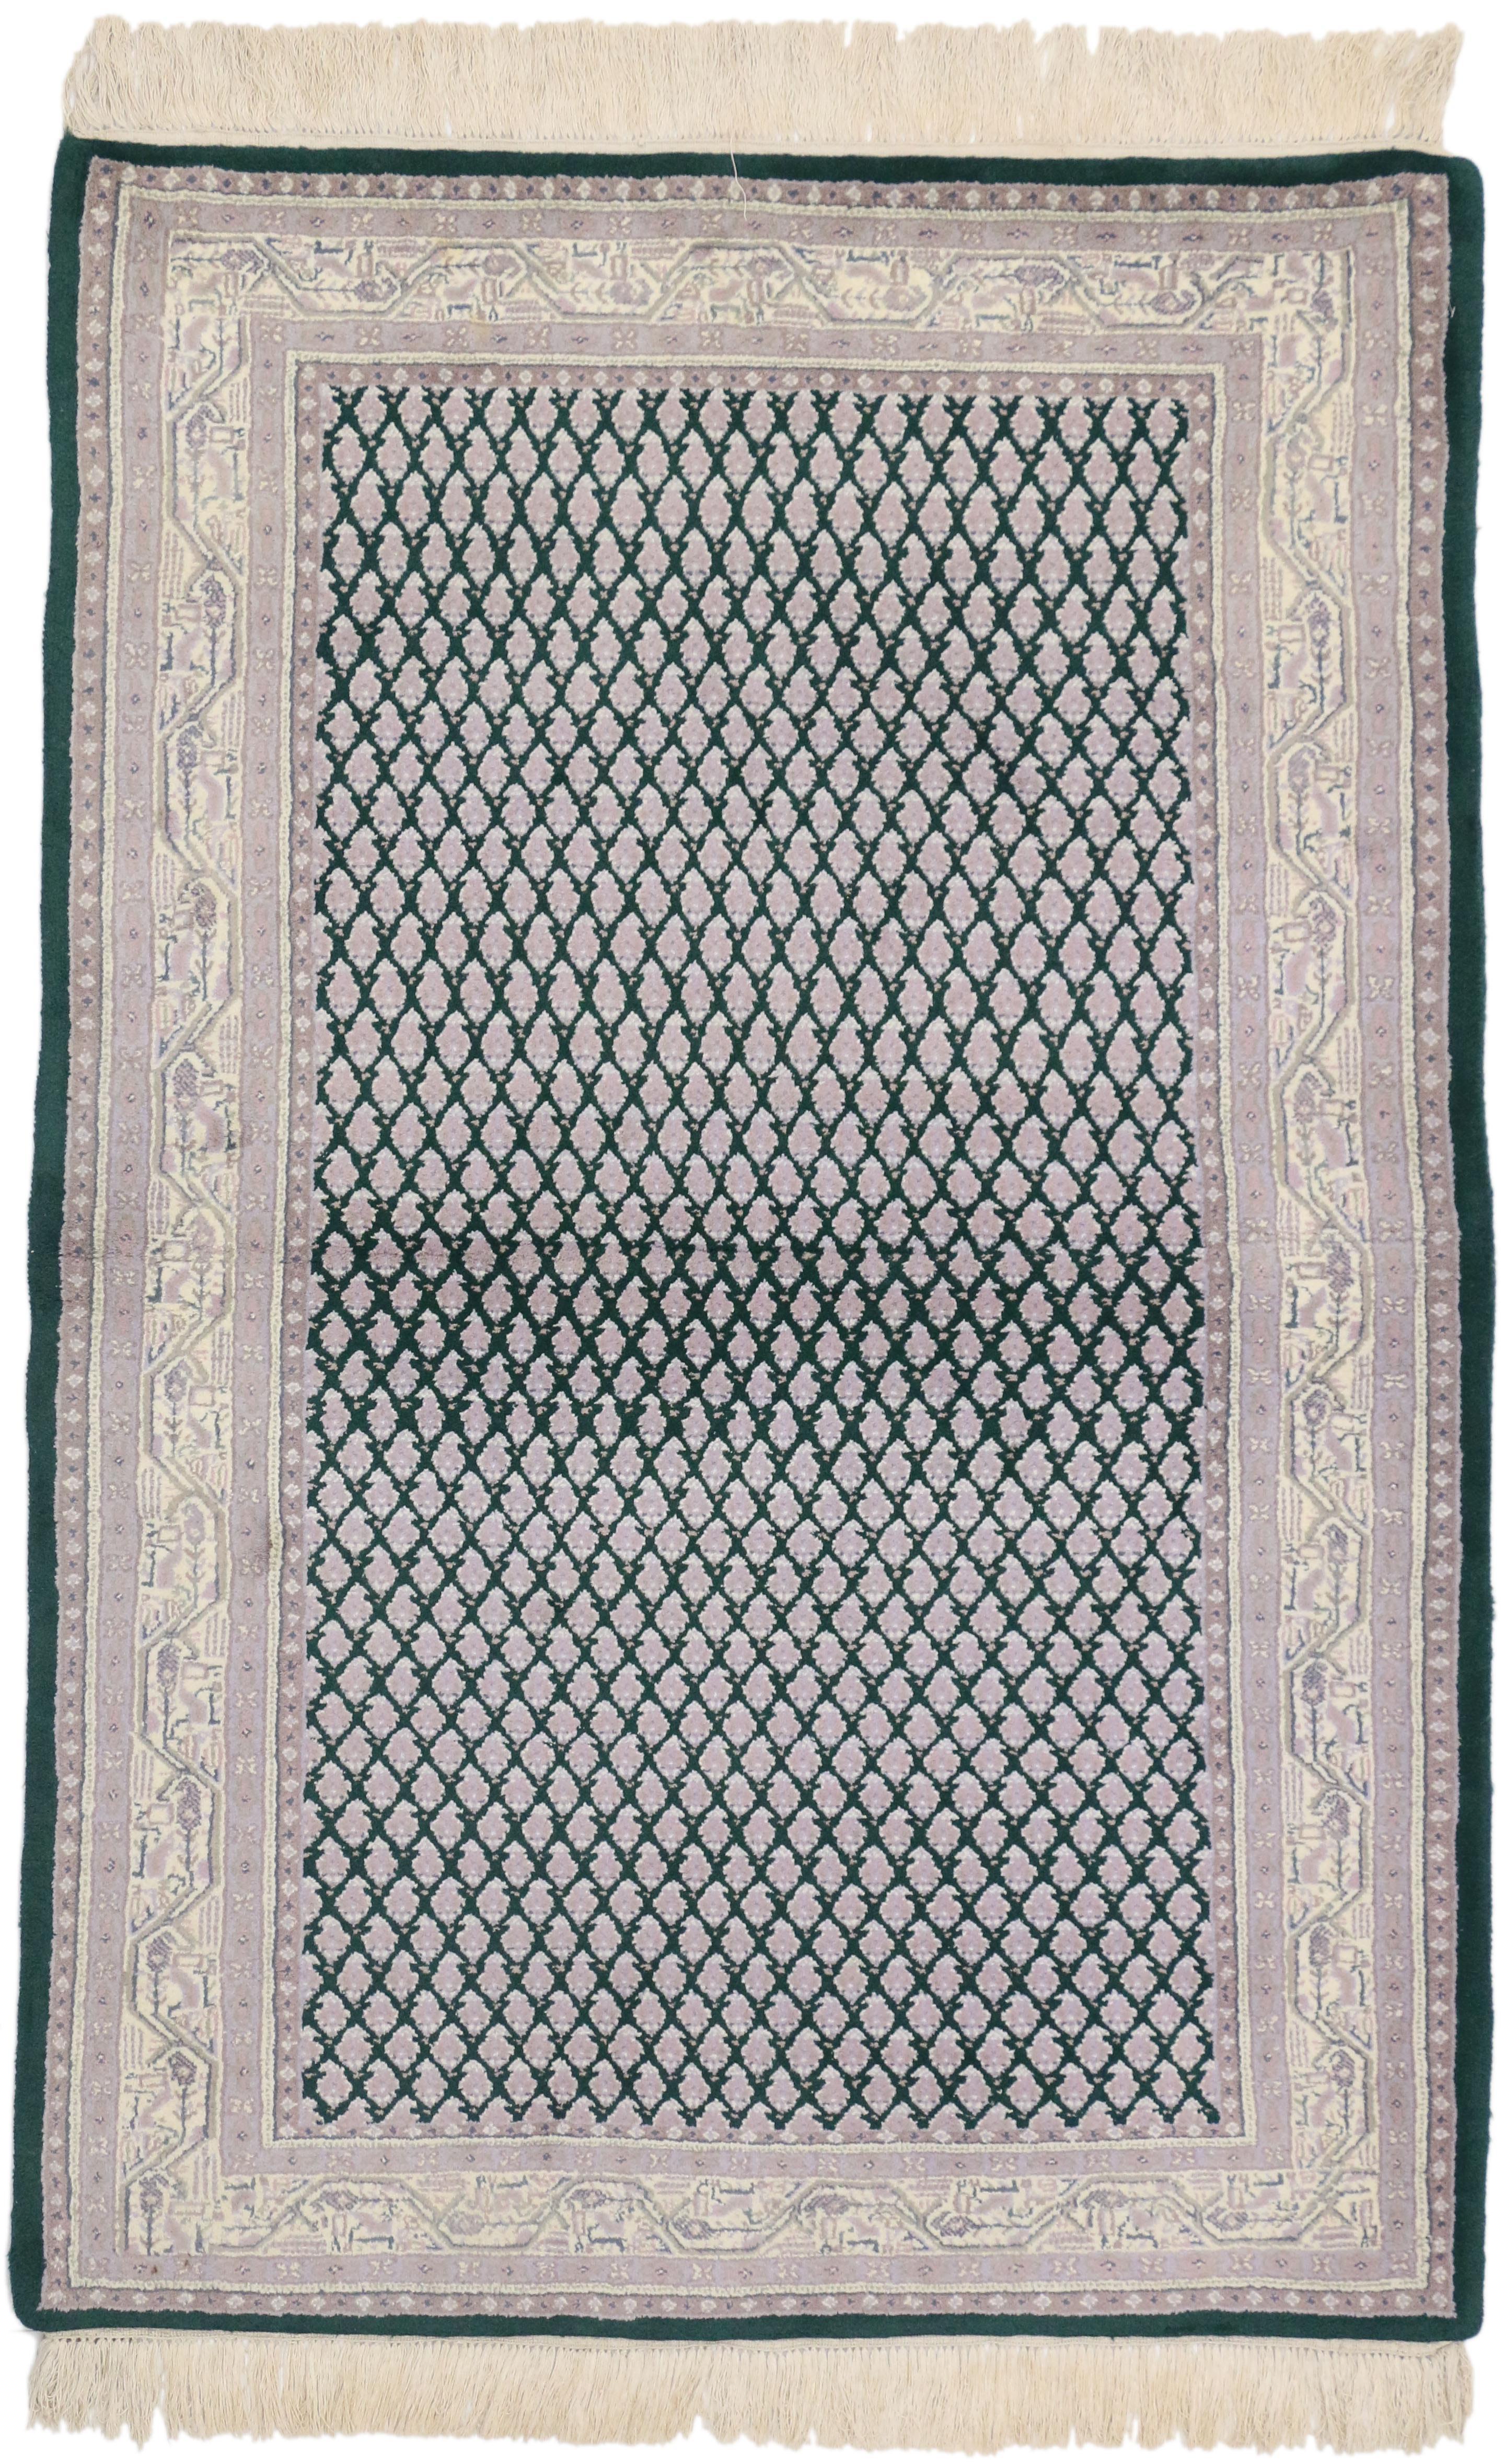 71912 vintage Indian Persian style rug with Traditional design. This hand knotted wool vintage Persian Style rug features an all-over small-scale mir boteh pattern spread across an abrashed bottle green field. The widely used boteh motif is thought